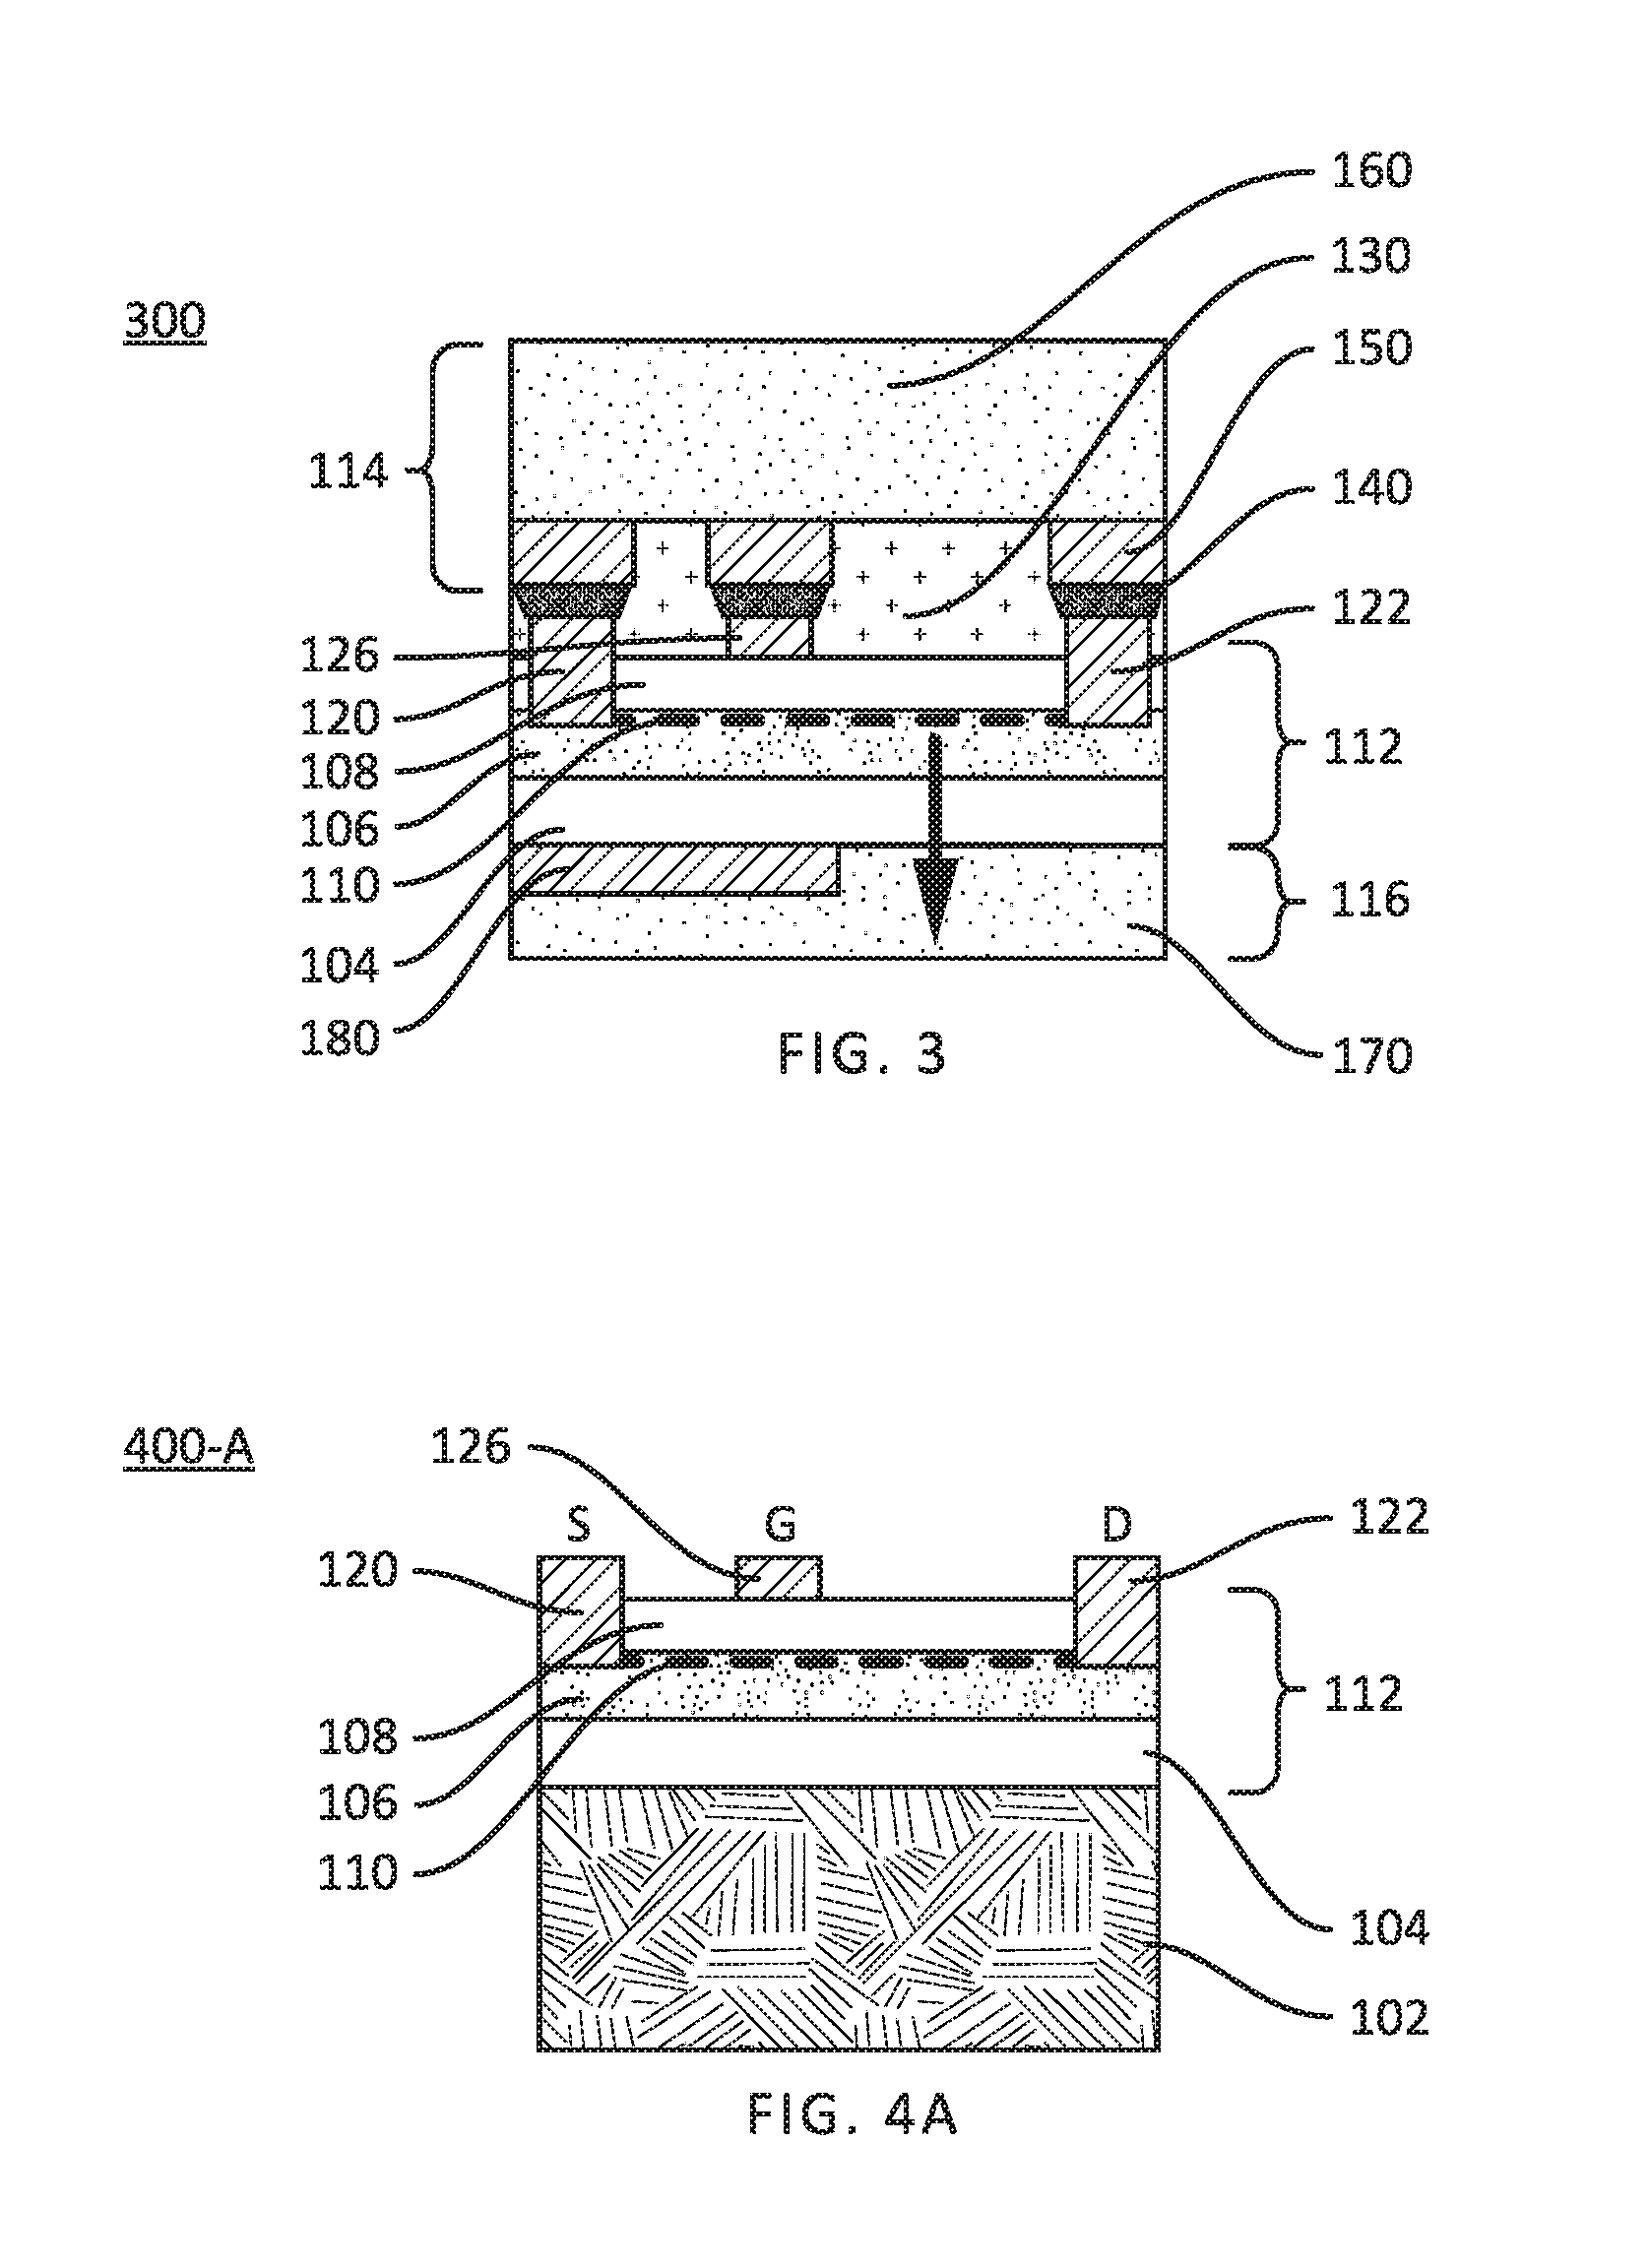 GaN SEMICONDUCTOR DEVICE STRUCTURE AND METHOD OF FABRICATION BY SUBSTRATE REPLACEMENT